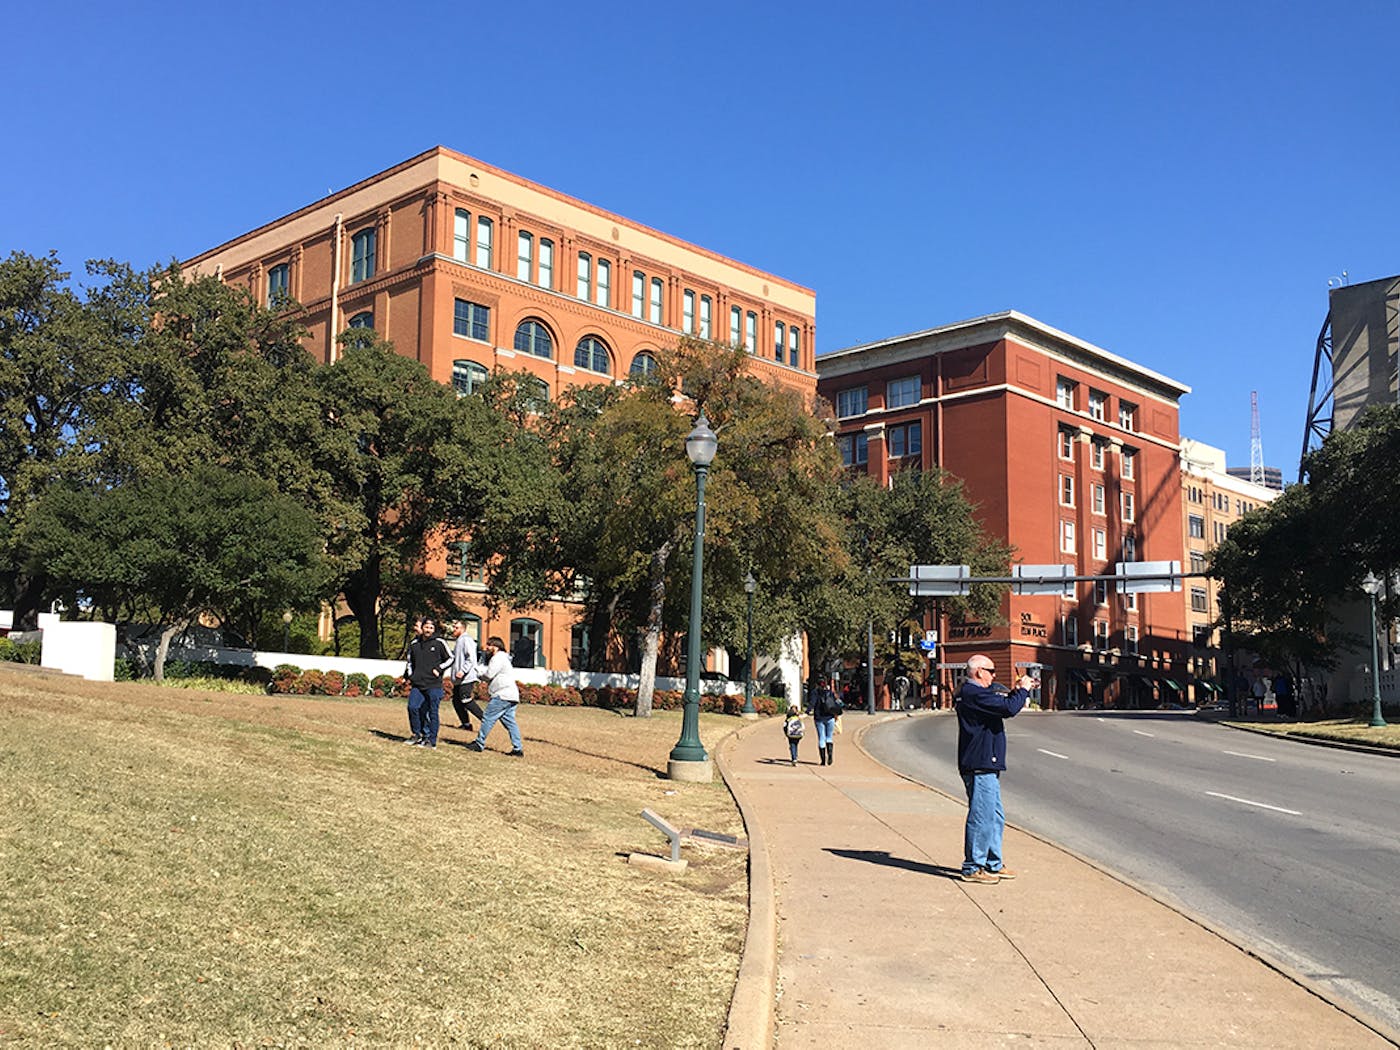 jfk-assassination-relics-and-grassy-knoll-fence-items-up-for-auction